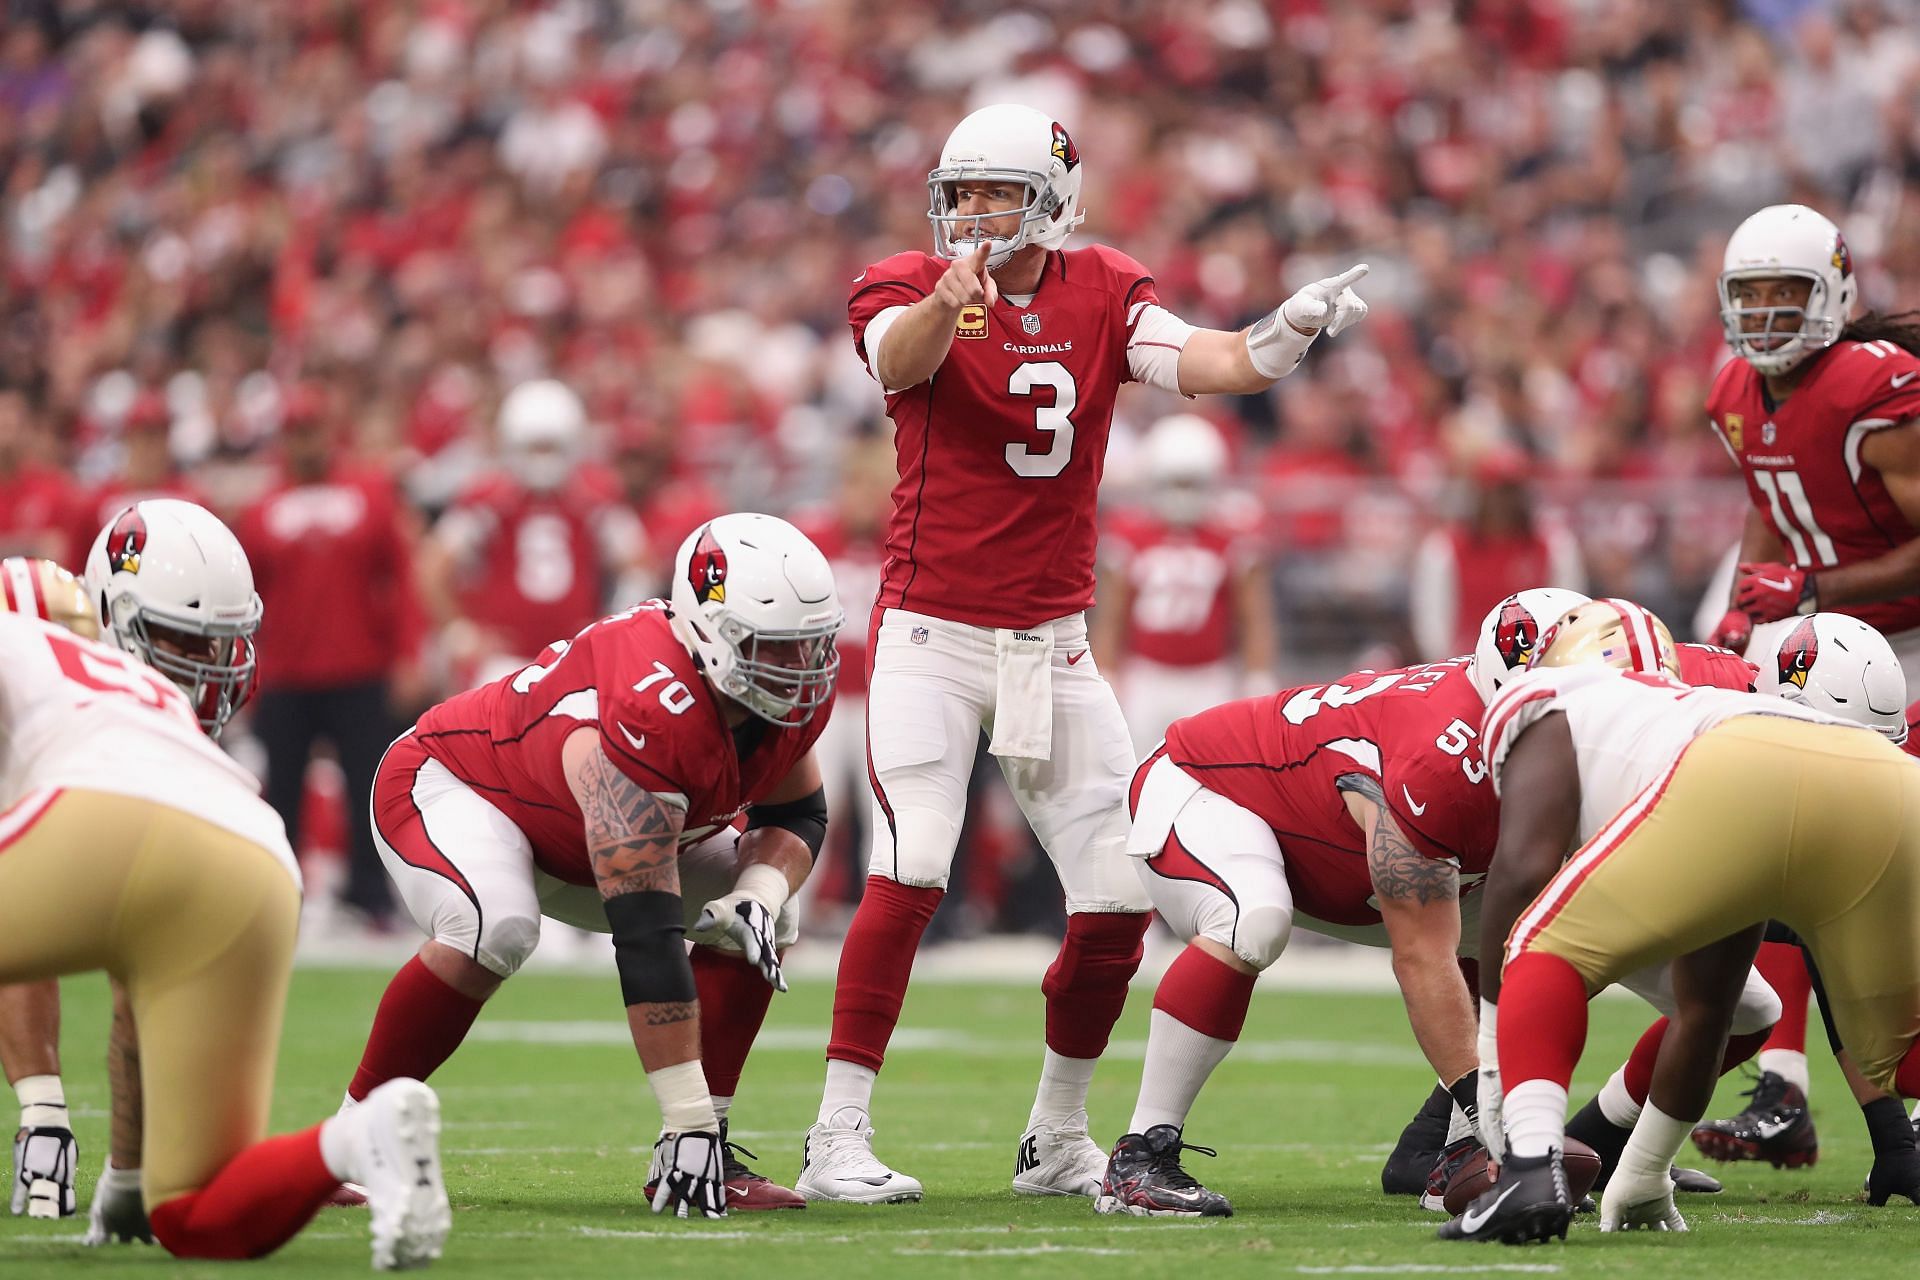 San Francisco 49ers v Arizona Cardinals:GLENDALE, AZ - OCTOBER 01: Quarterback Carson Palmer #3 of the Arizona Cardinals gestures during the first half of the NFL game against the San Francisco 49ers at the University of Phoenix Stadium on October 1, 2017 in Glendale, Arizona. (Photo by Christian Petersen/Getty Images)